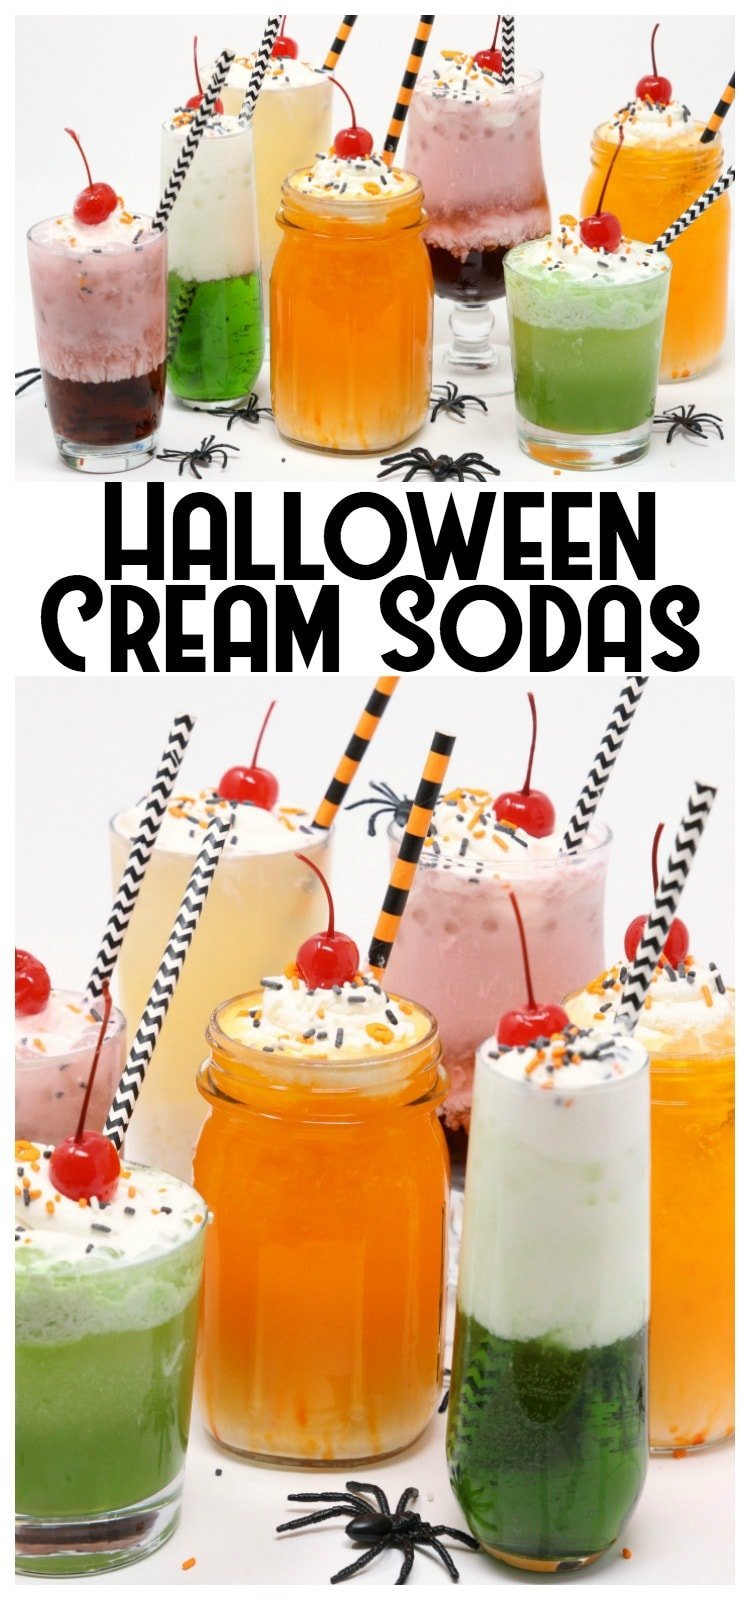 Halloween Cream Sodas made with sweet syrups, cream and club soda are a delicious & festive addition to any Halloween party! Easy #Halloween #drink idea from Butter With A Side of Bread